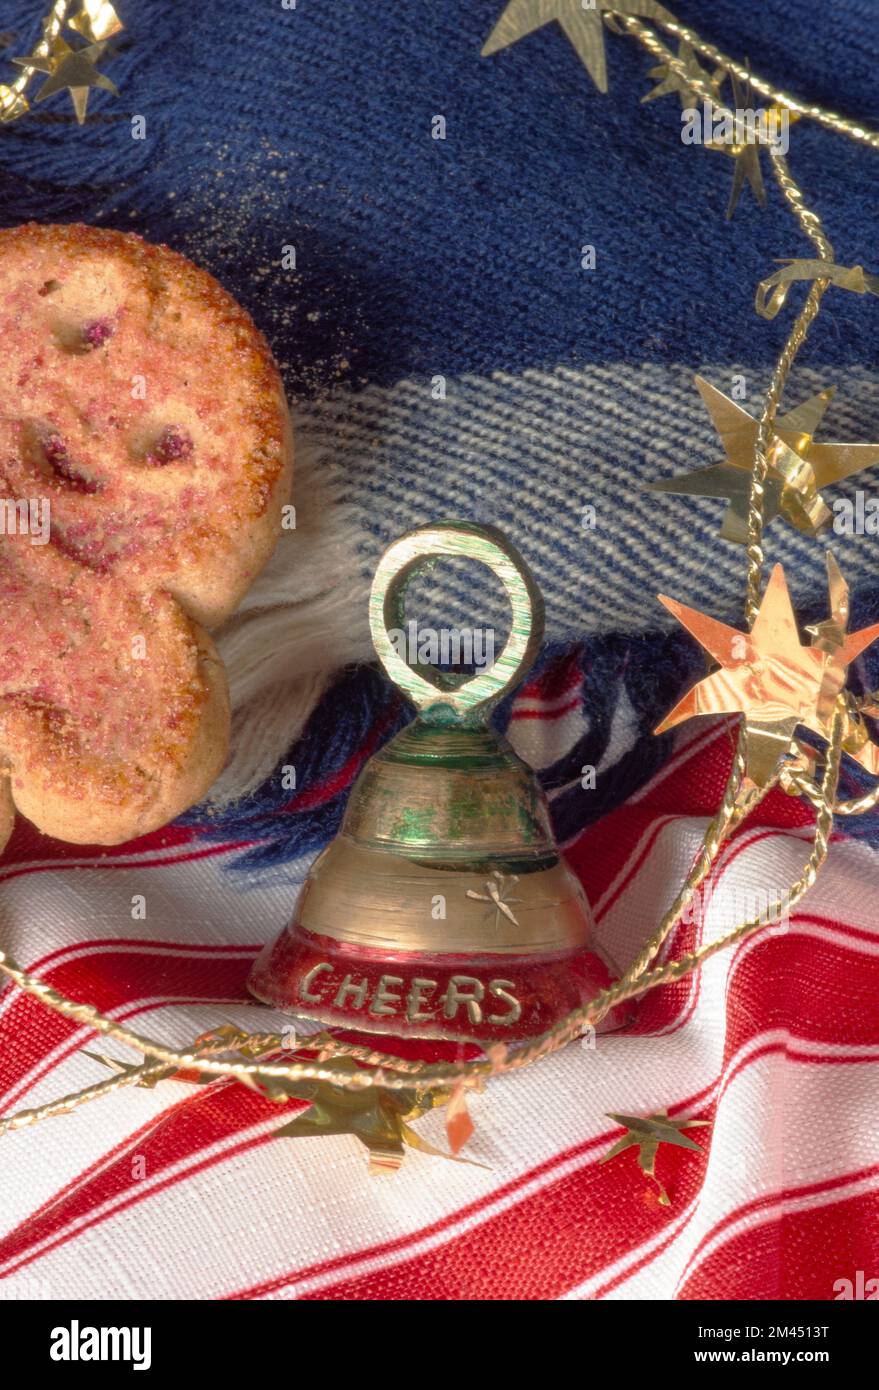 CHEERS bell surrounded by gingerbread cookie, gold stars, red and white striped fabric and blue scarf background. Closeup of celebration party time. Stock Photo